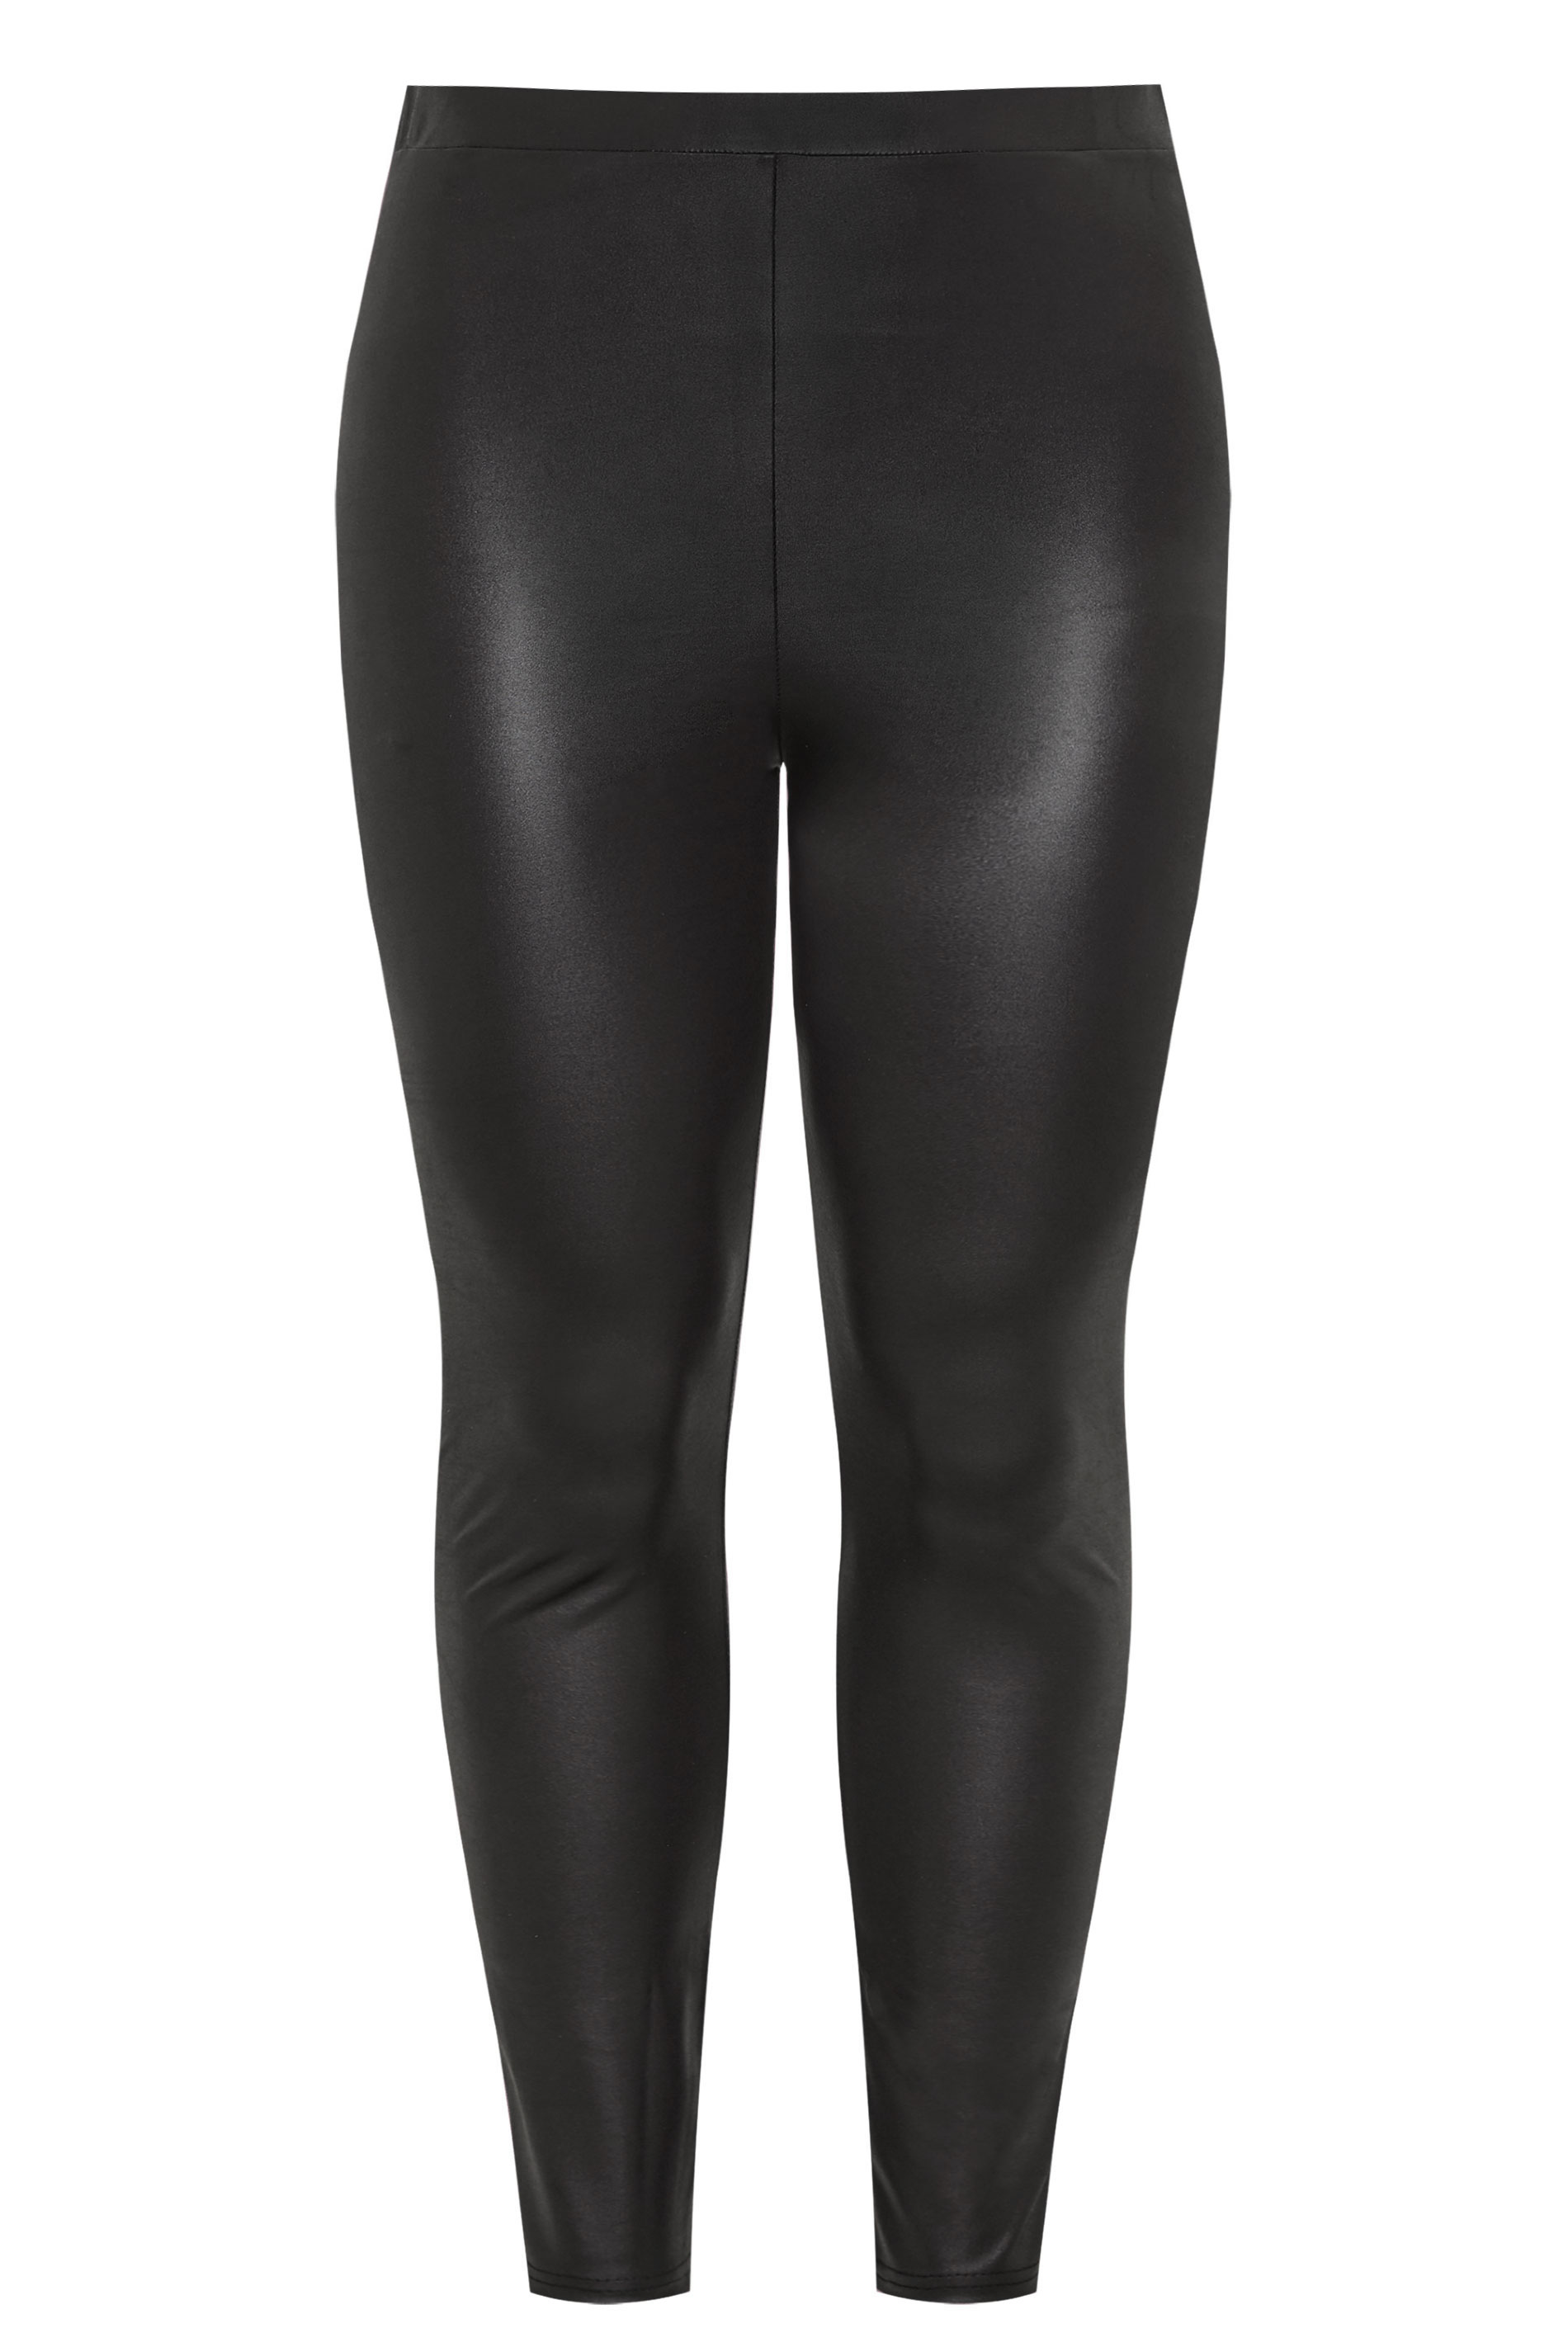 Black Coated Stretch Leggings | Yours Clothing